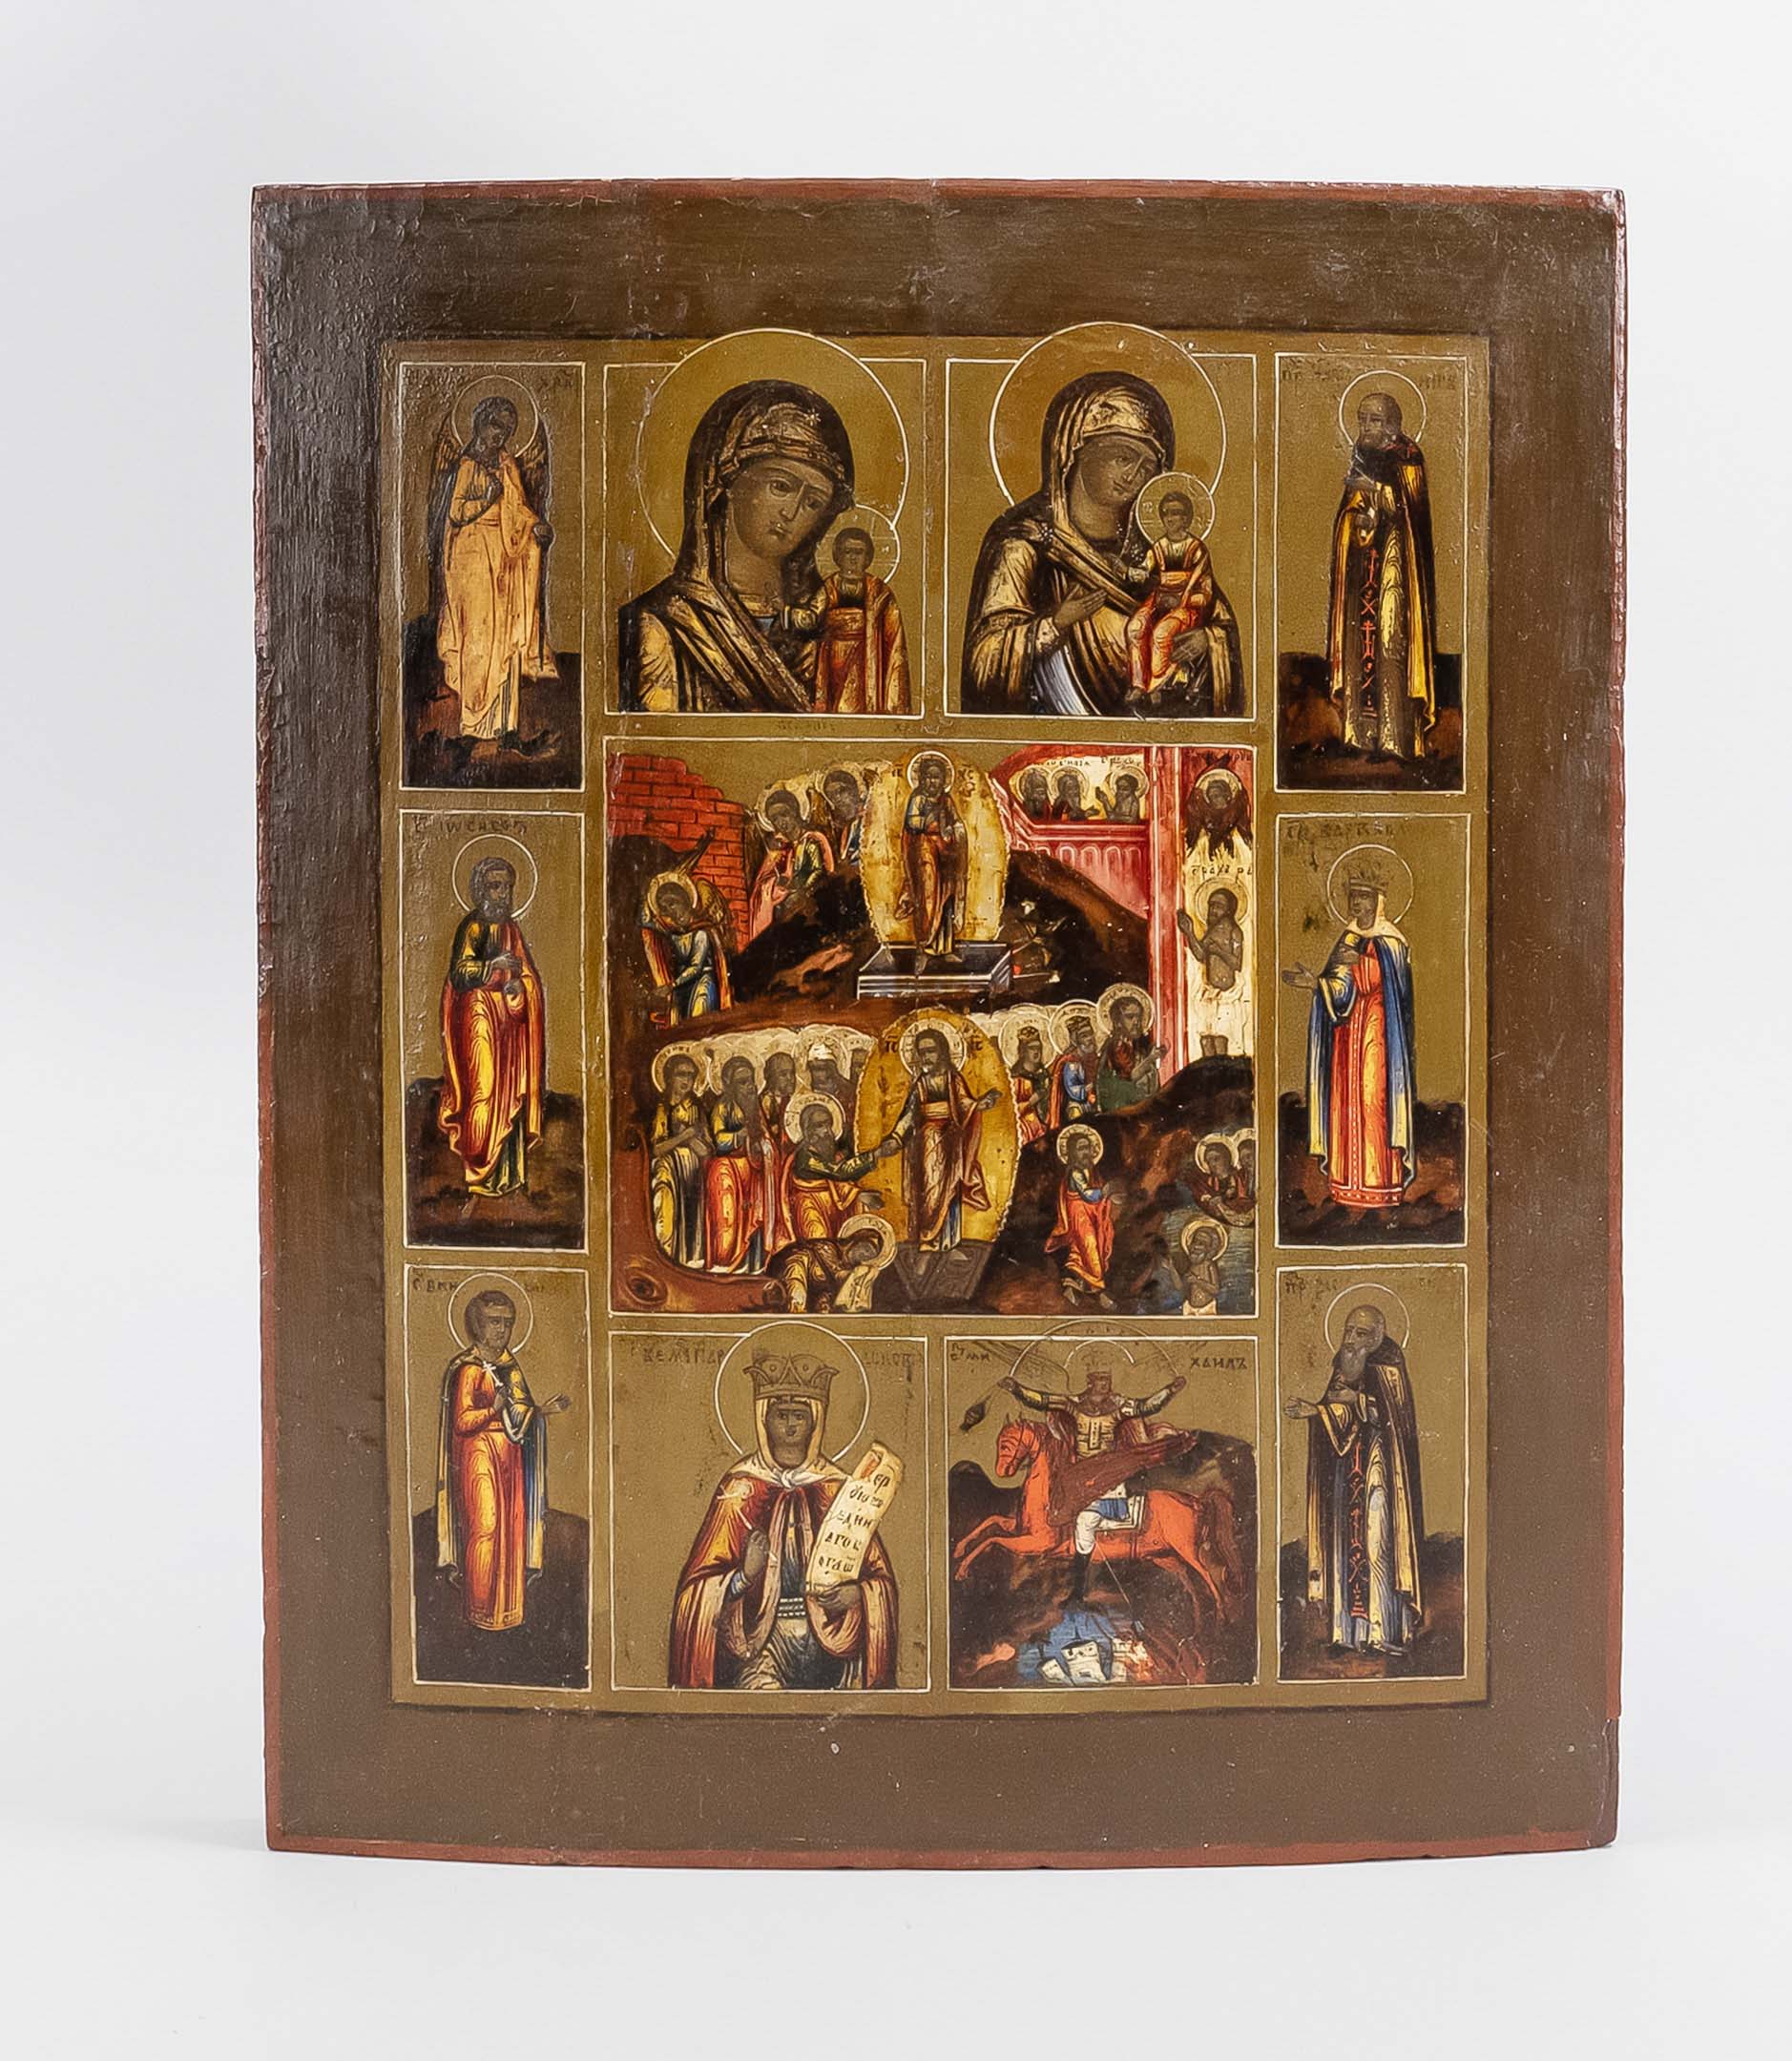 Icon, Russia, probably end of 19th century, polychrome and gold/silver on wood, both sponki missing,